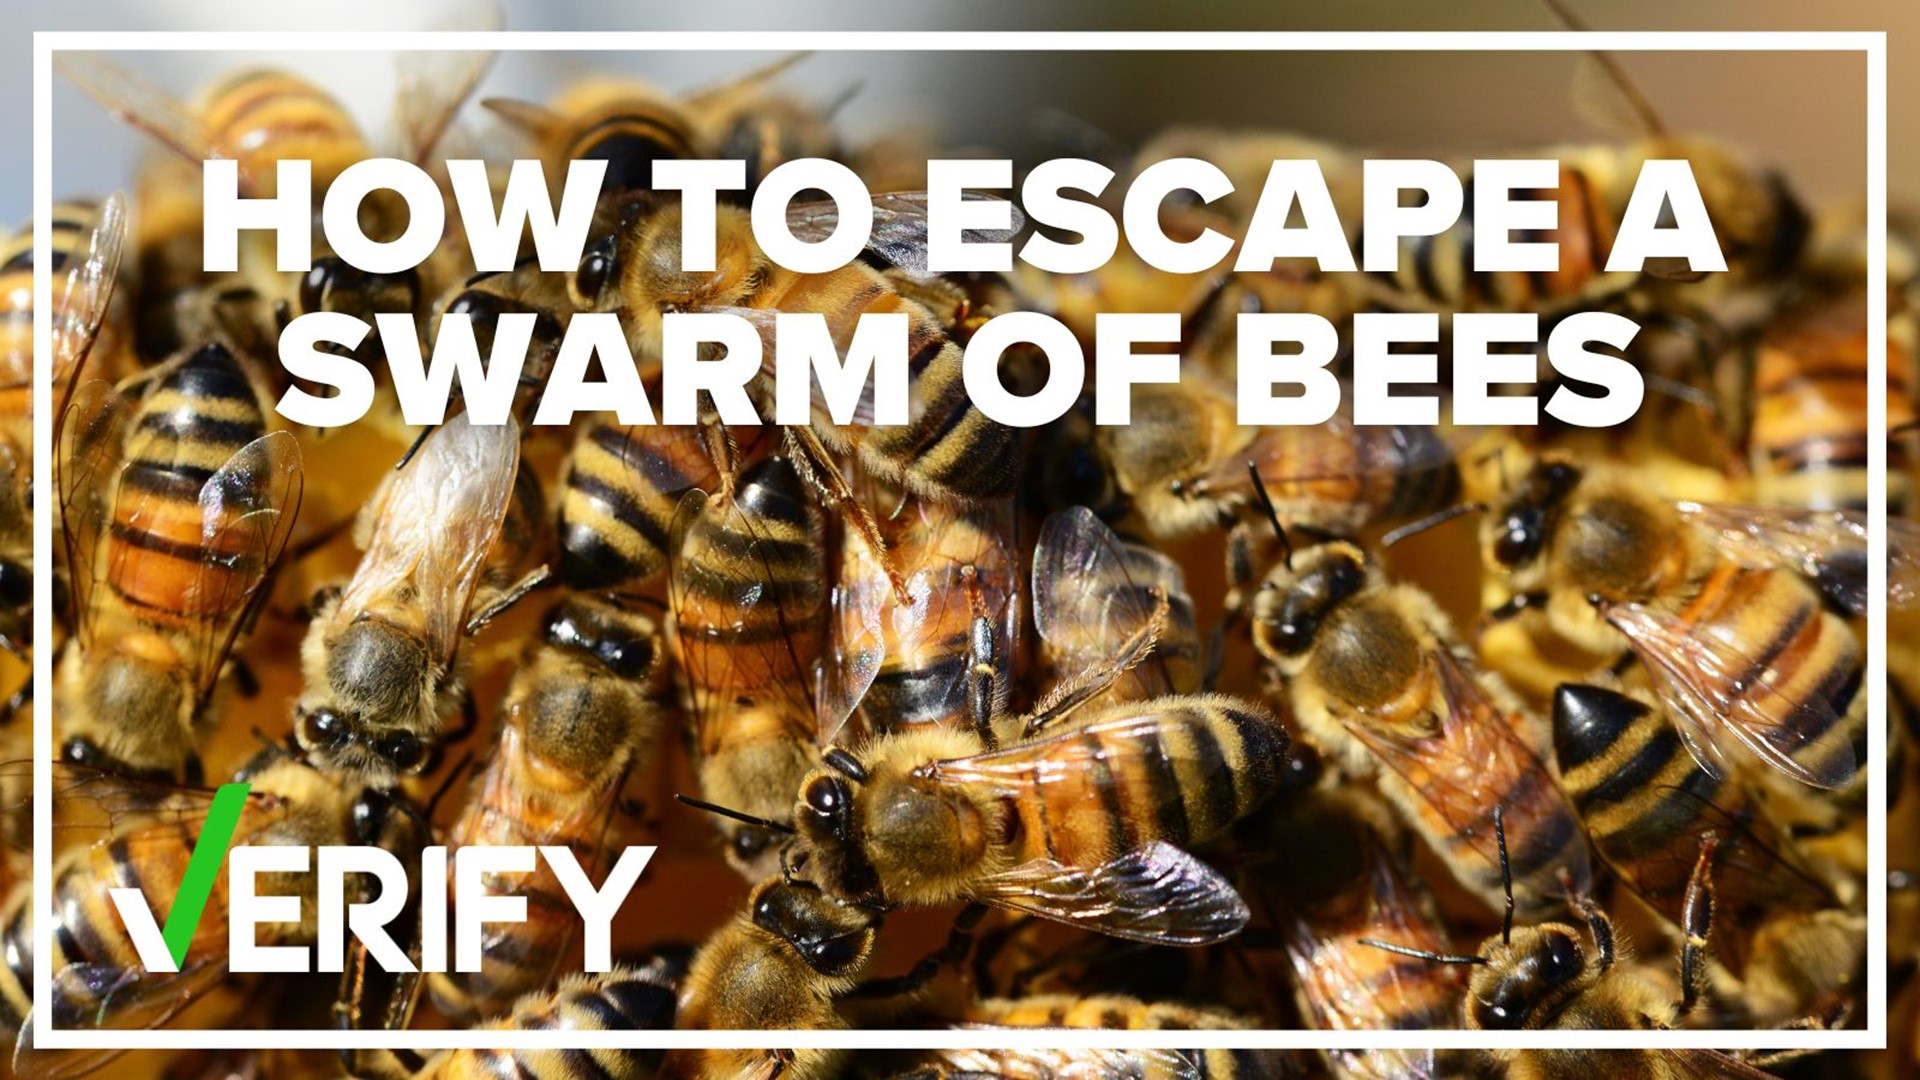 If you’re being attacked by a swarm of bees, should you jump into a pool of water?